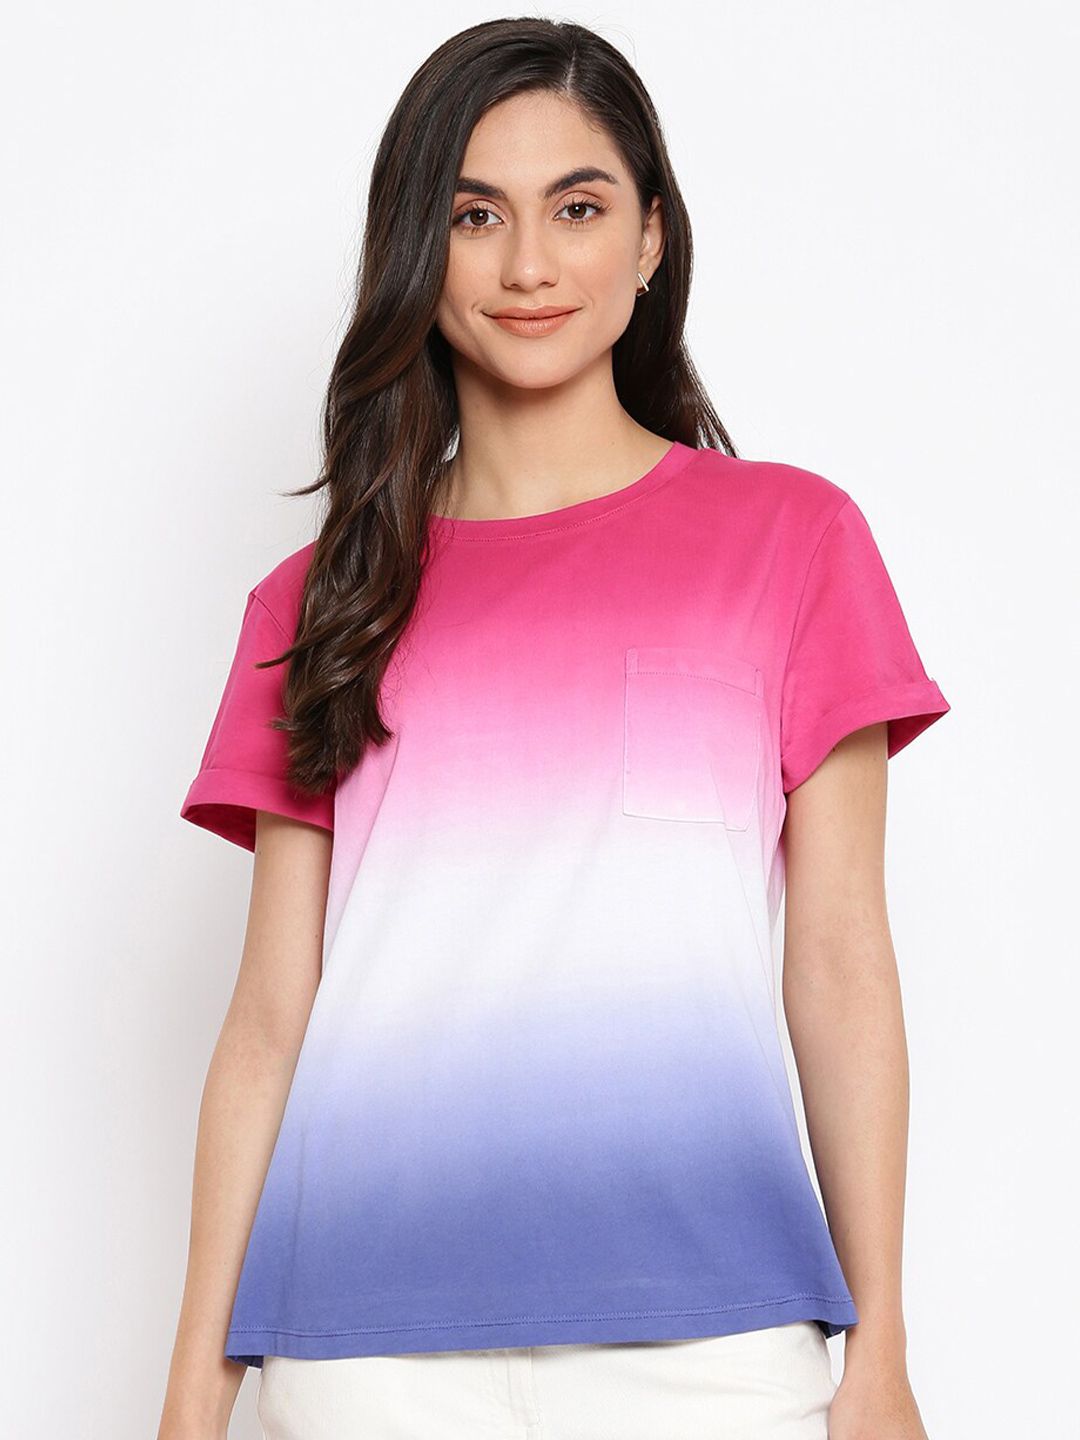 Fabindia Pink & White Tie and Dye Top Price in India